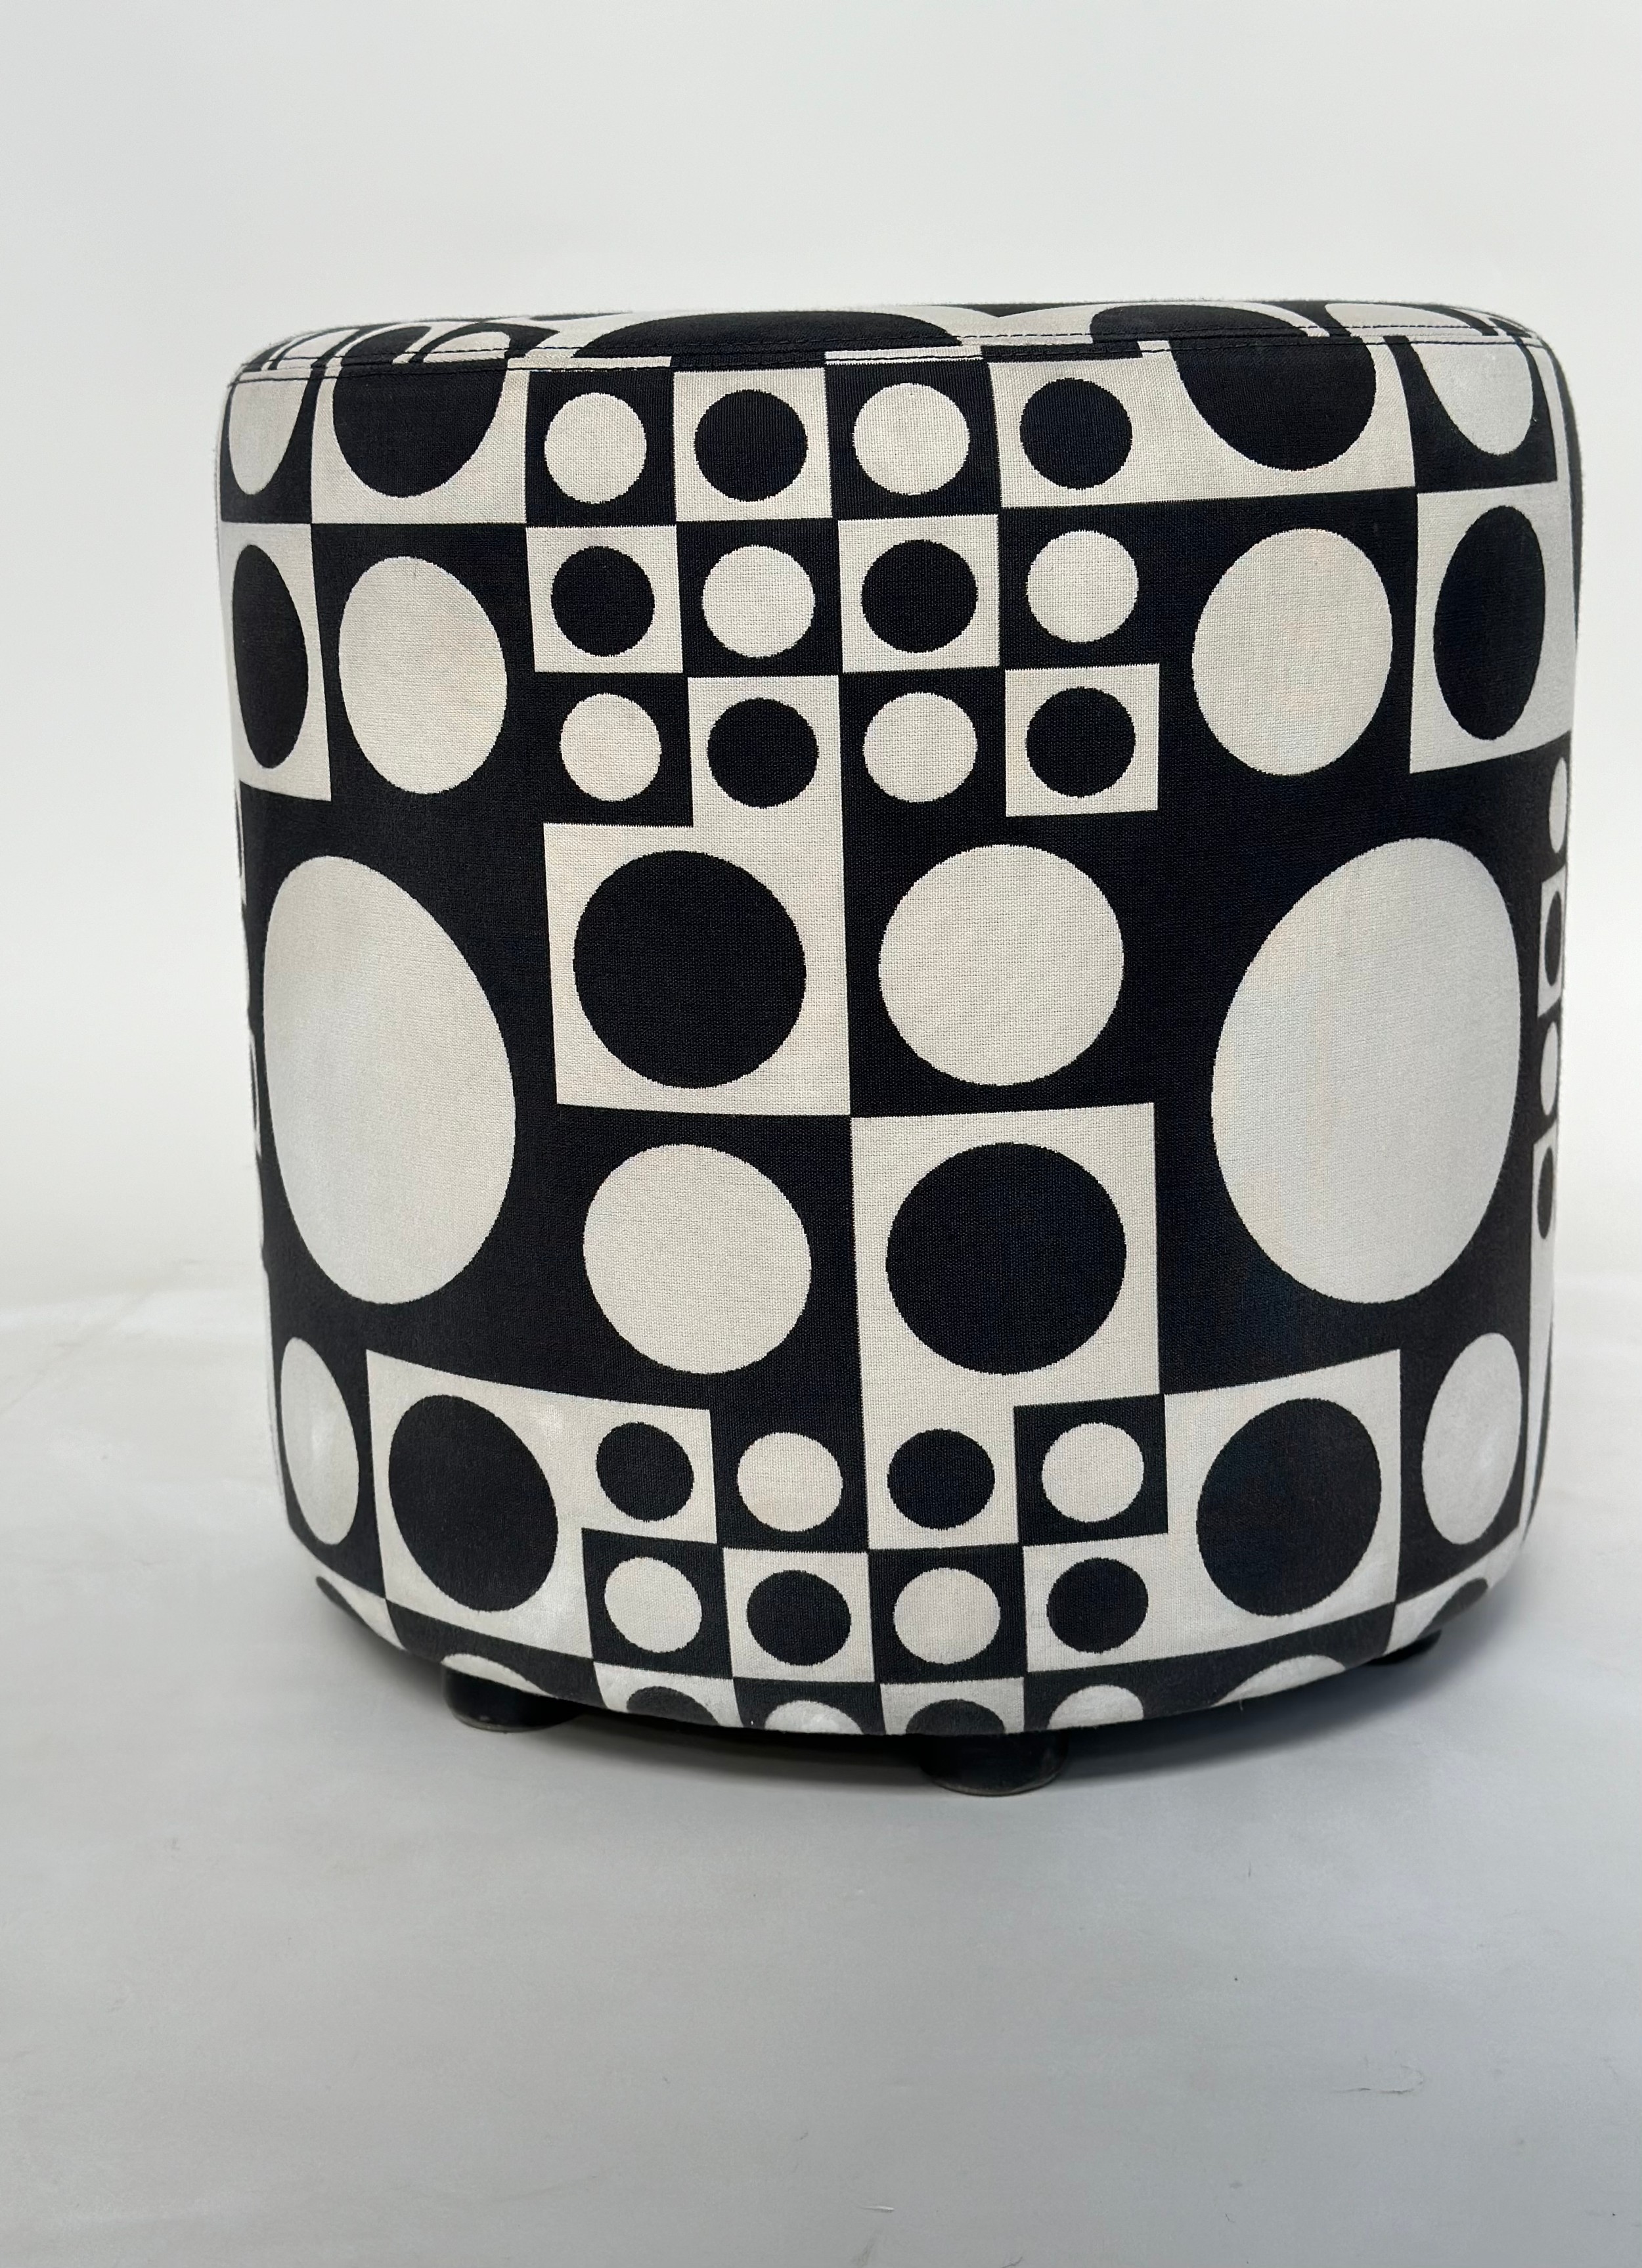 STOOL BY JOHANSON DESIGN, circular drum form with black/white 60s style fabric upholstery, 44cm W - Image 3 of 5